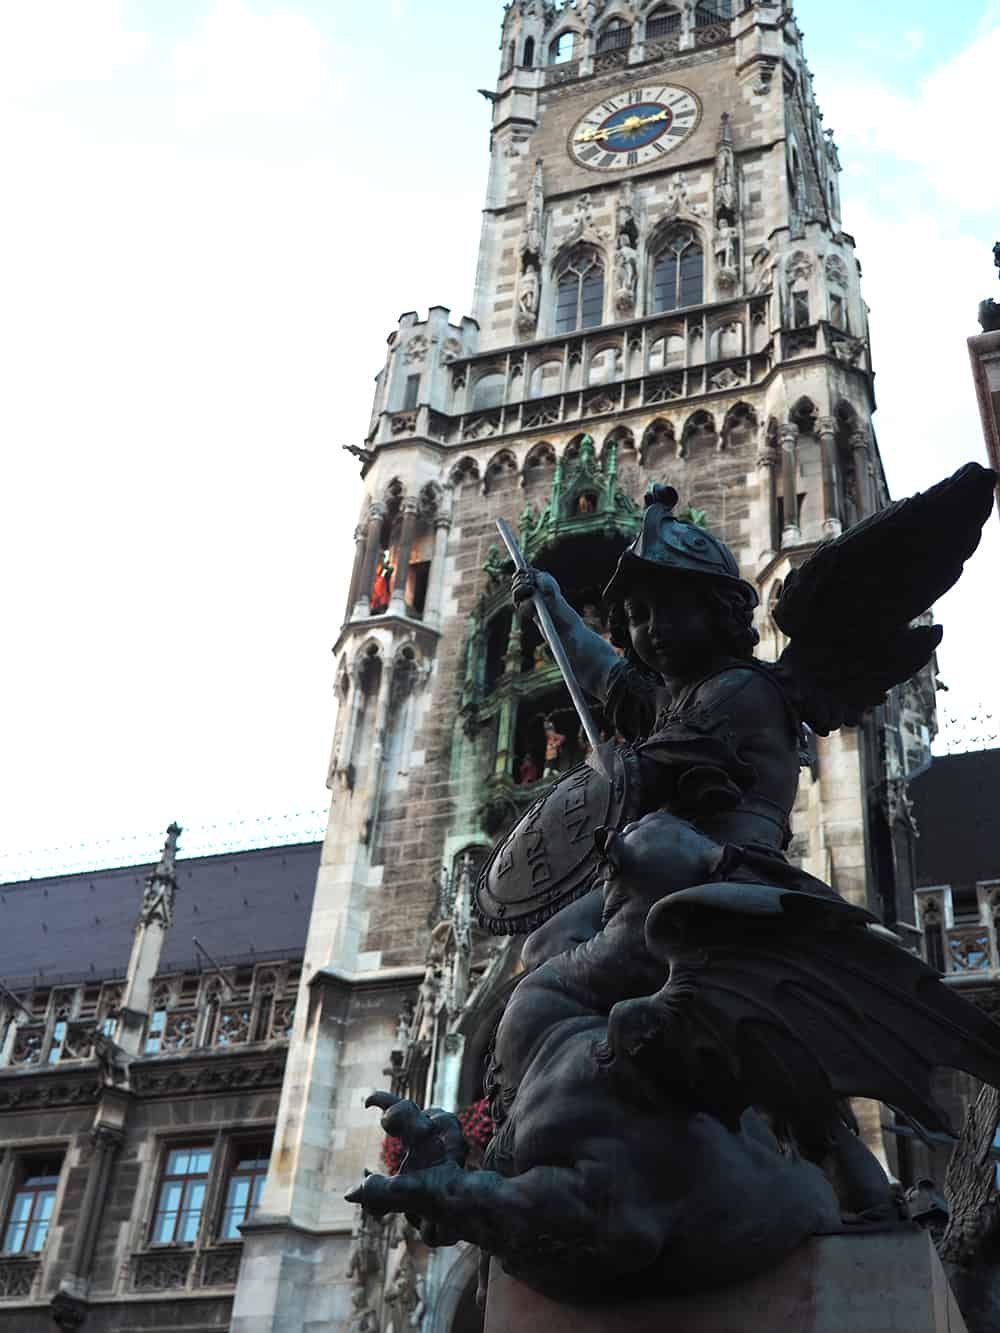 The Rathaus-Glockenspiel rings everyday at 11 AM and 5 PM (and at noon in the summer). The glockenspiel has 32 figures and 43 bells. | via Autumn All Along